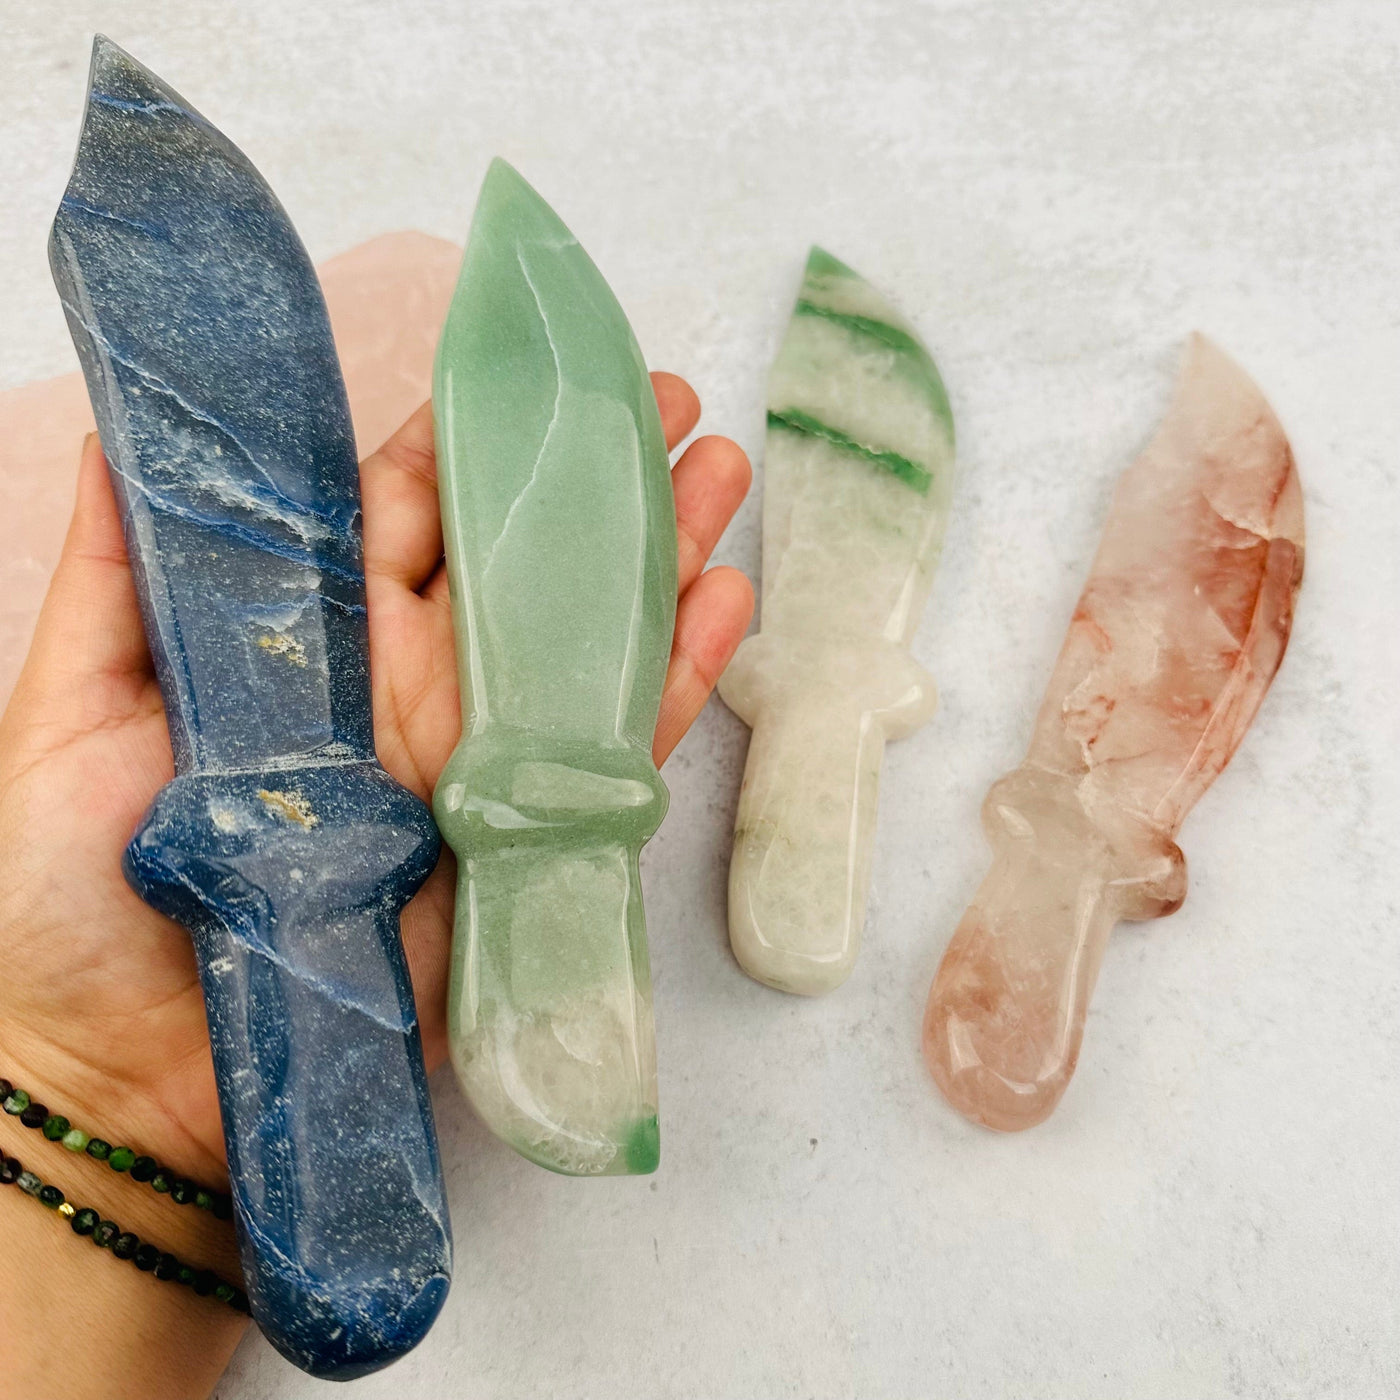 Crystal Gemstone Knife - Extra Large in hand for size reference 